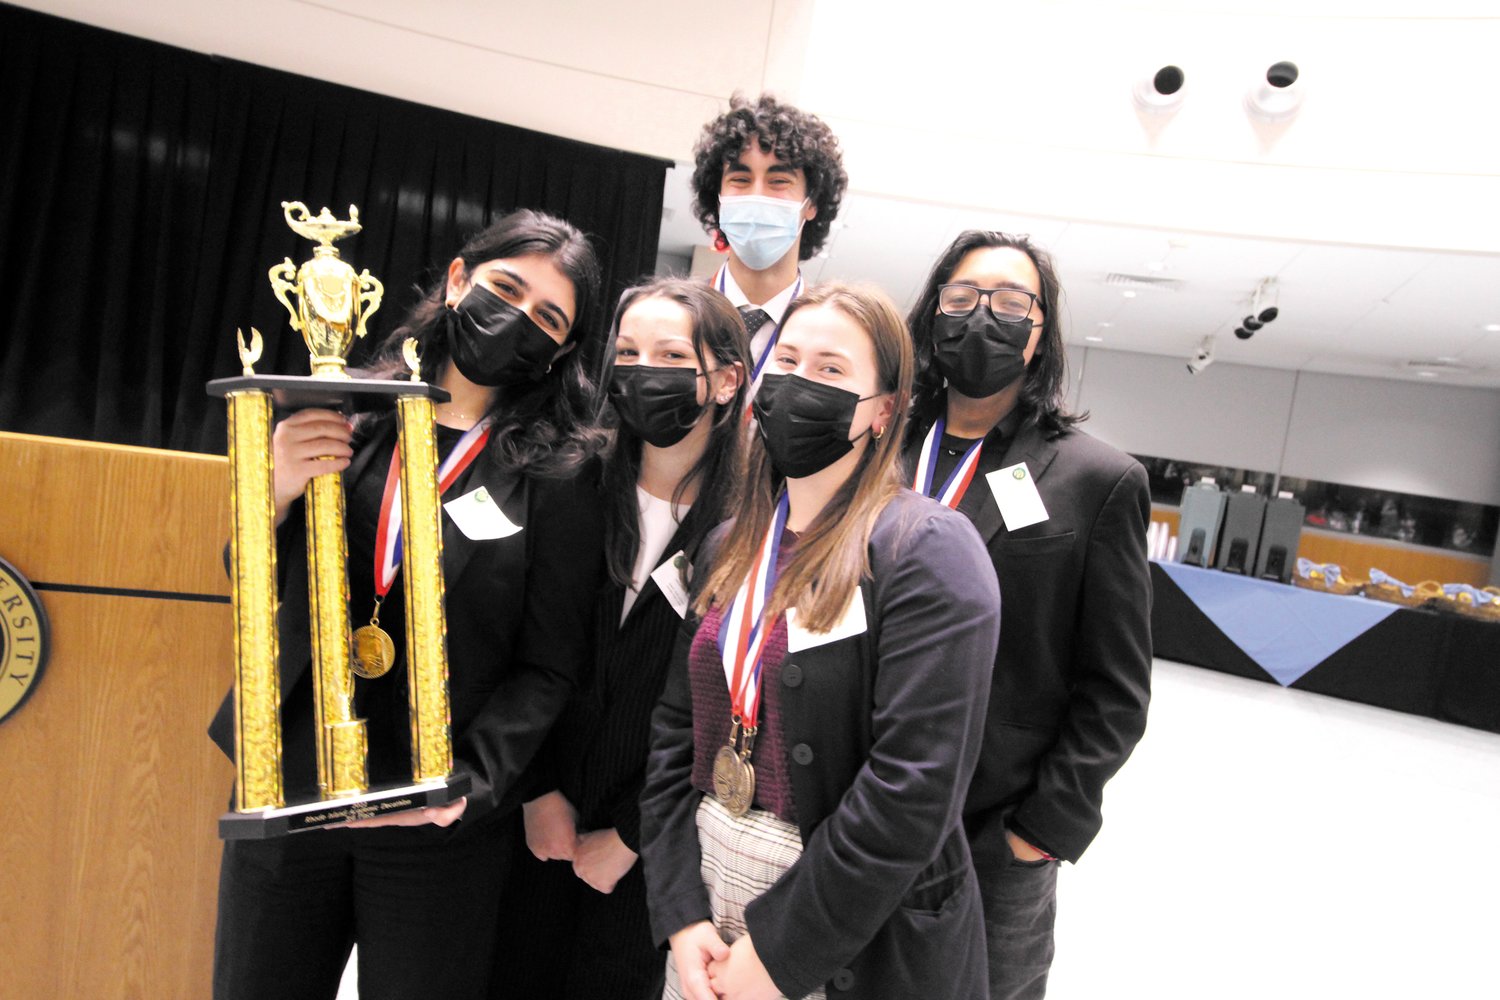 Members of the Cranston West team with the trophy they took home at the 39th Rhode Island Academic Decathlon held Sunday at Bryant University.